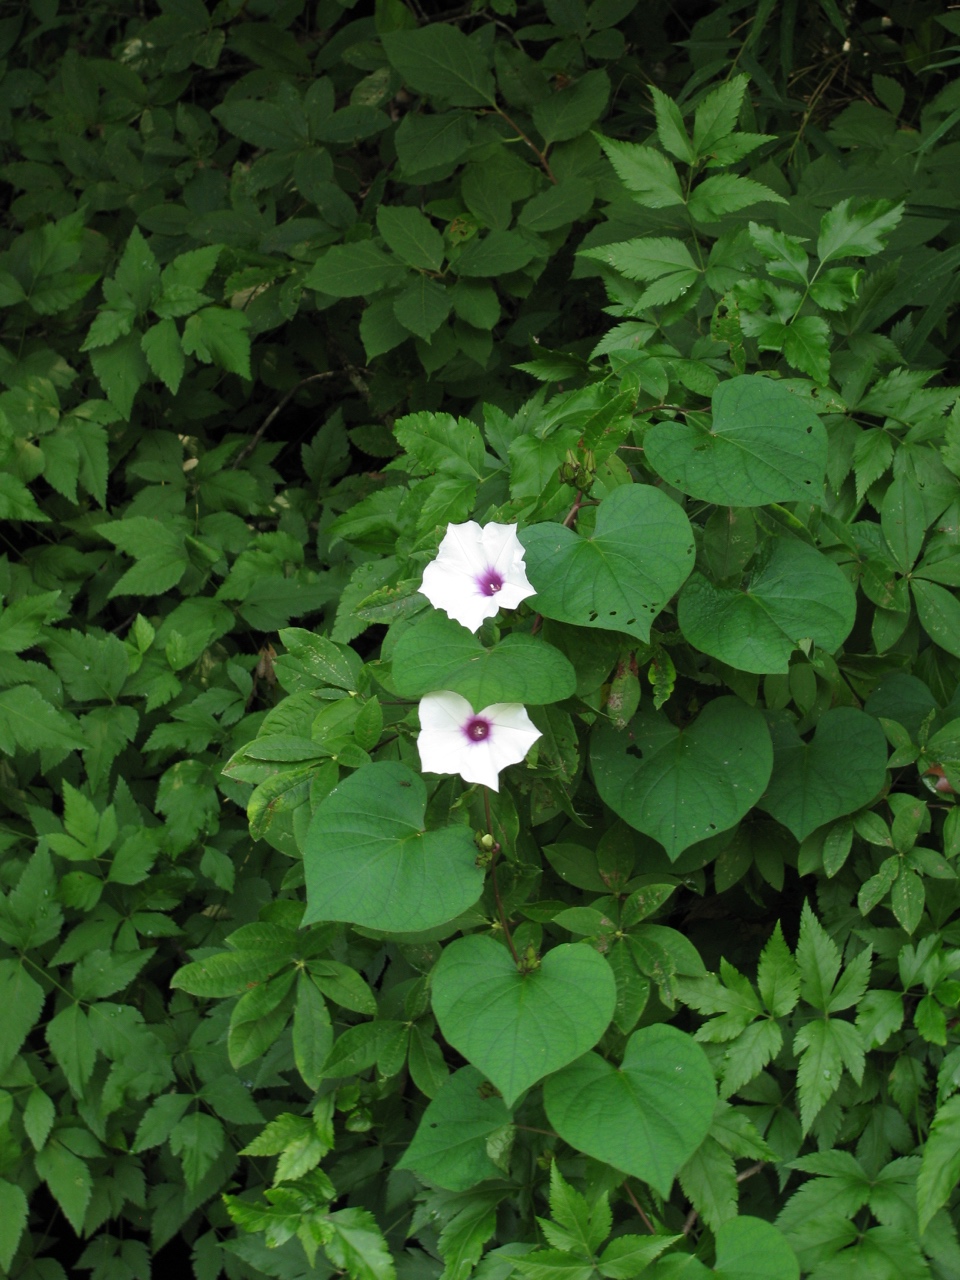 The Scientific Name is Ipomoea pandurata. You will likely hear them called Wild Potato-vine, Wild Sweet Potato, Manroot, Man-of-the-earth. This picture shows the Vine with large funnel-shaped (funnelform) white flowers with red throats and heart-shaped (cordate) leaves of Ipomoea pandurata